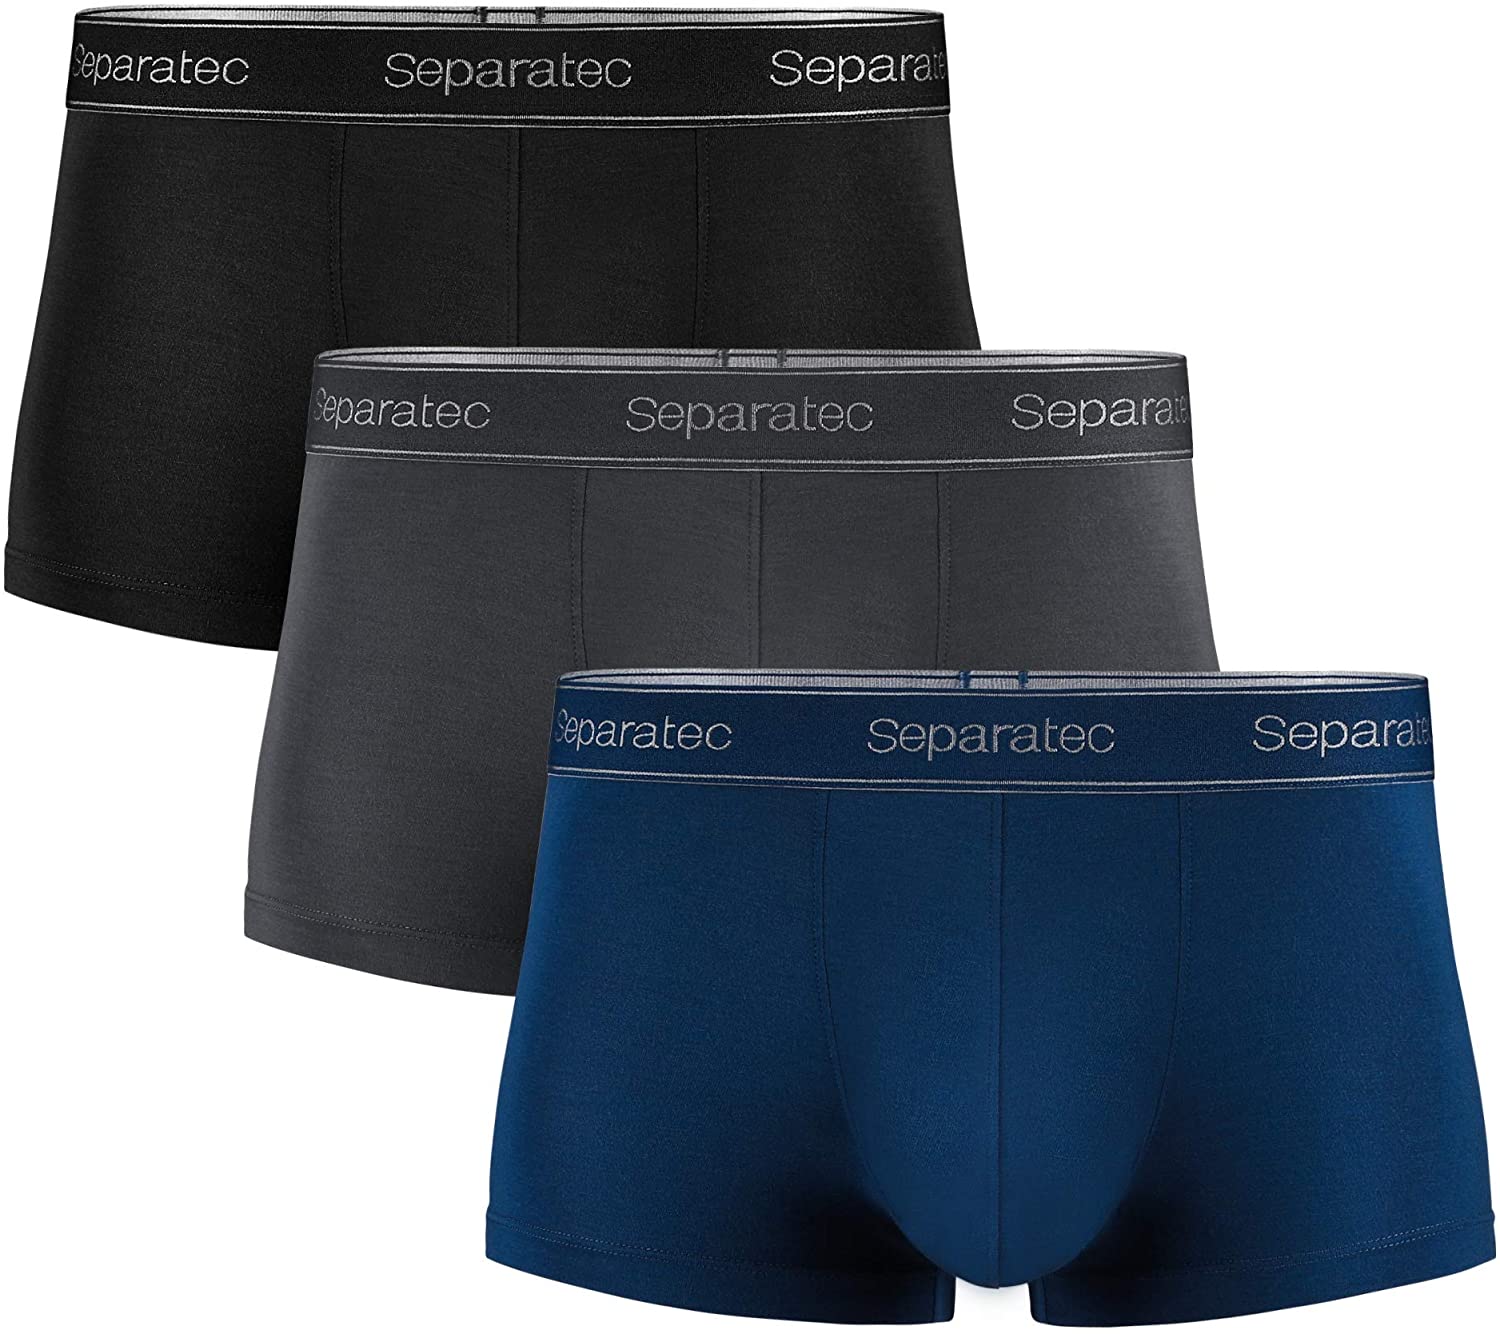 Separatec Men's Underwear Comfort Soft Micro Modal Trunks with Dual Pouch 3  Pack